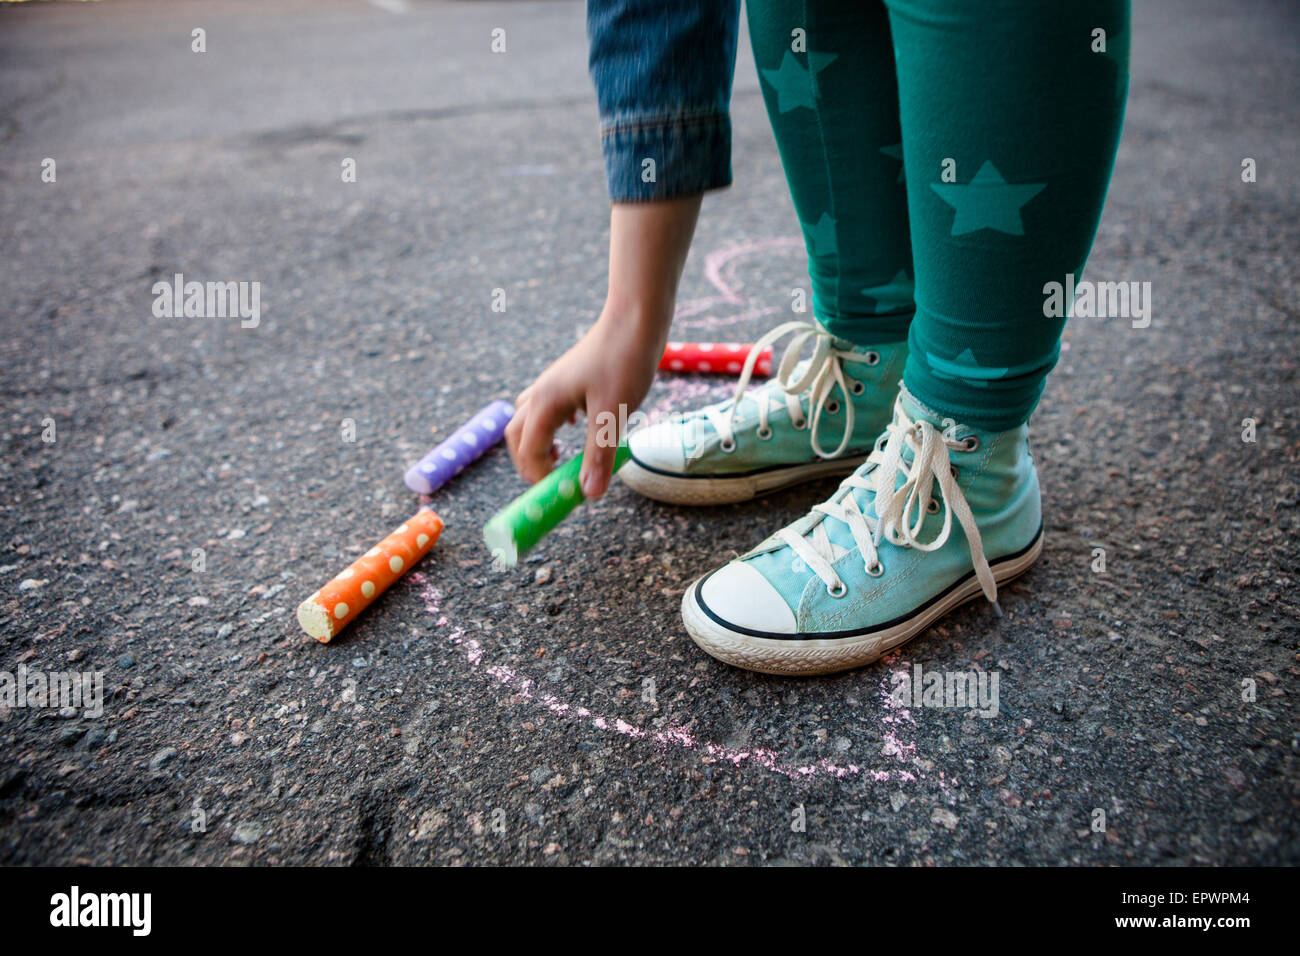 Girl drawing with street chalk on asphalt outdoors Stock Photo